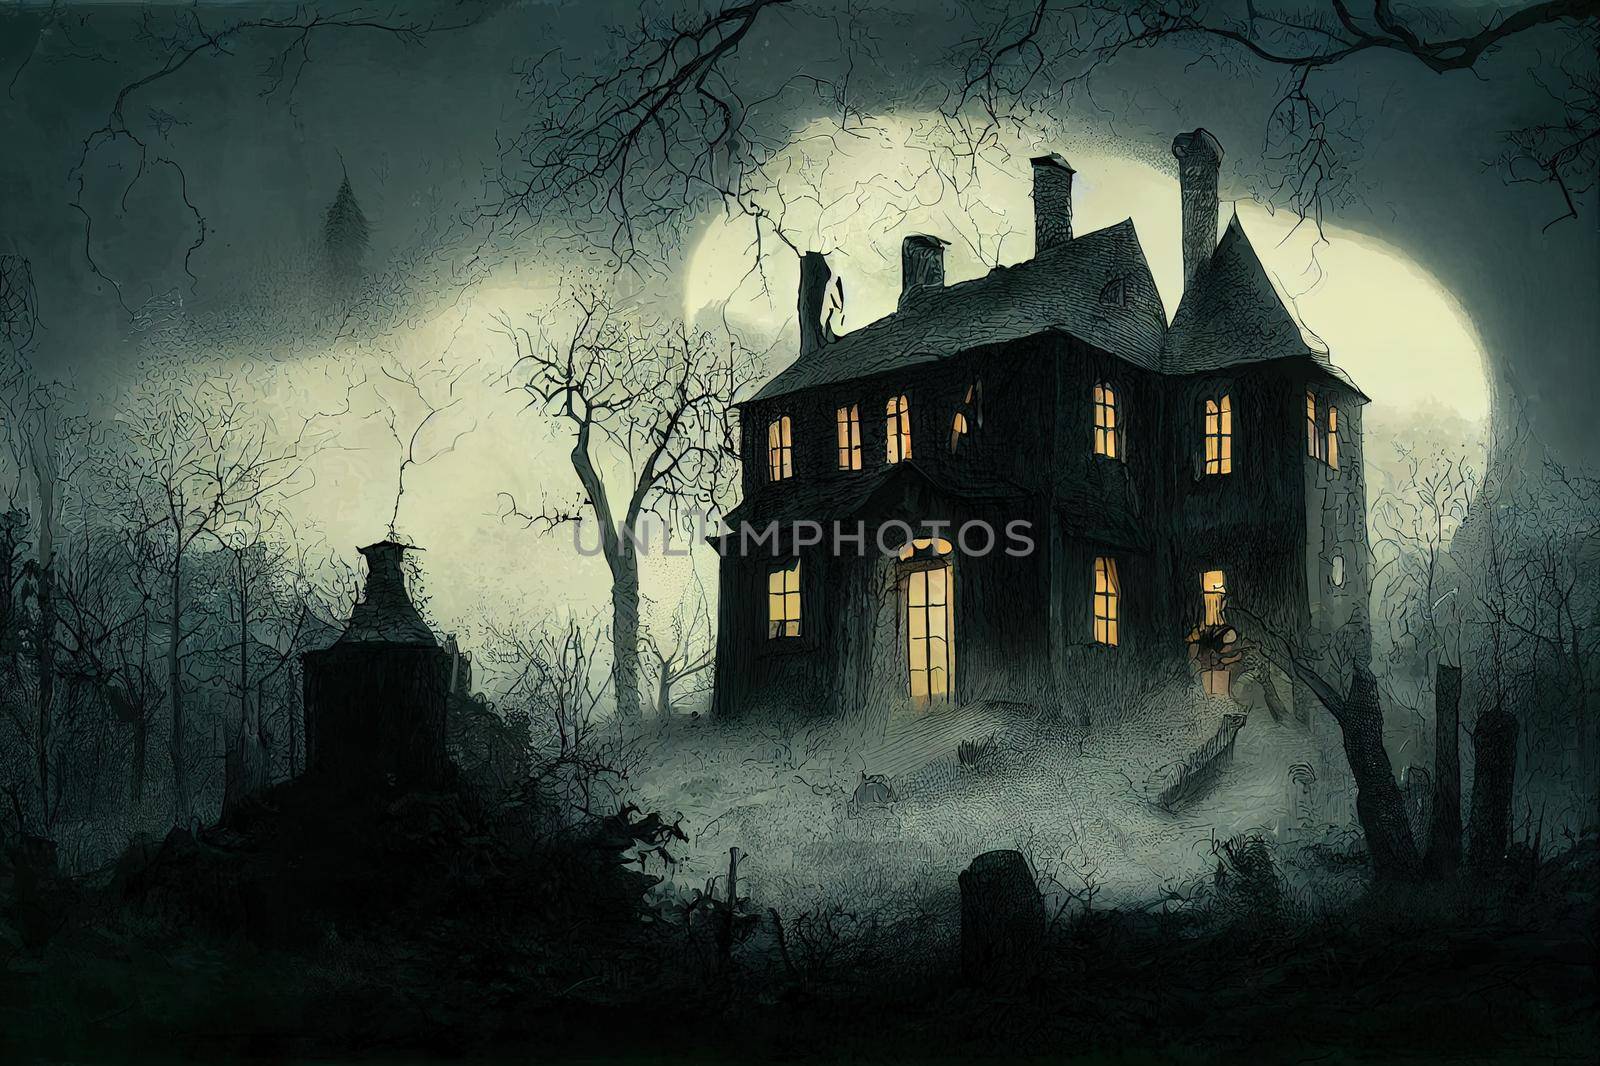 Graphic illustration of spooky house in the woods, for by 2ragon